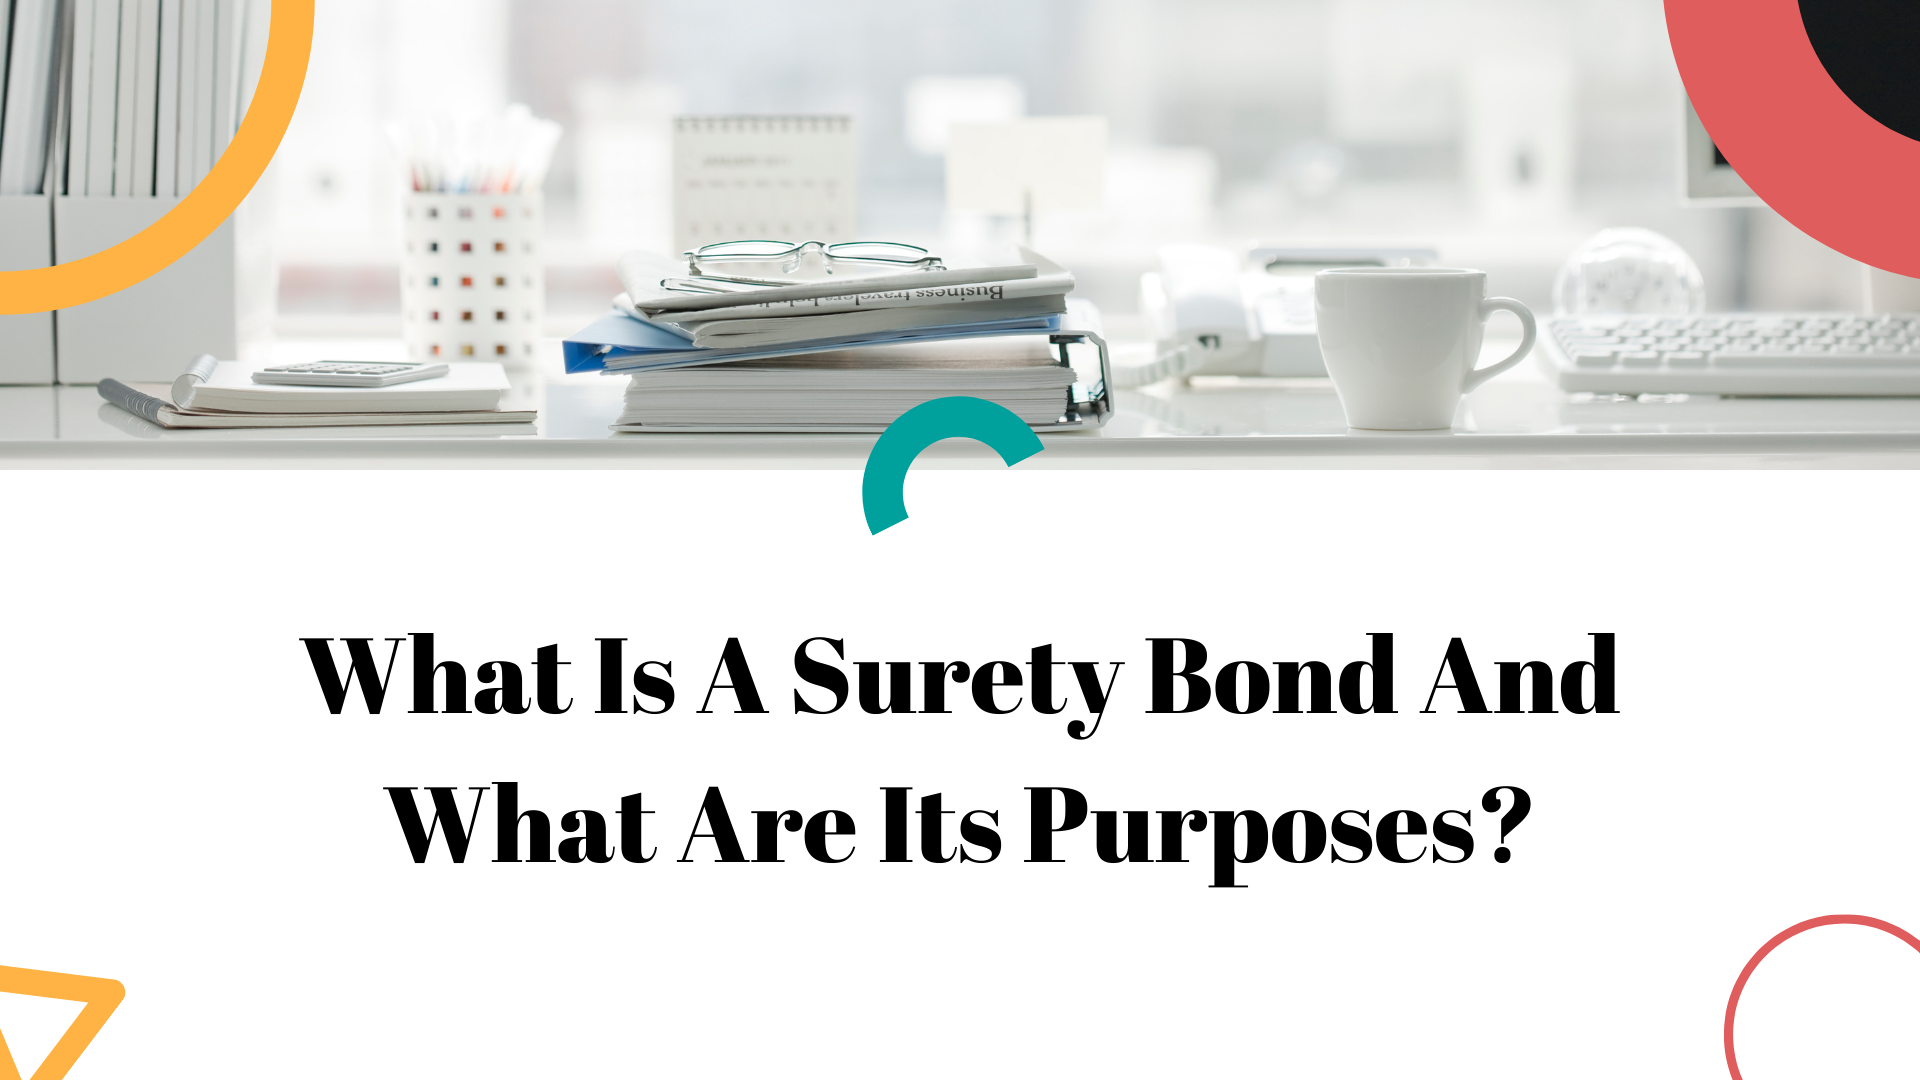 surety bond - What is a surety bond and what are its purposes - work table